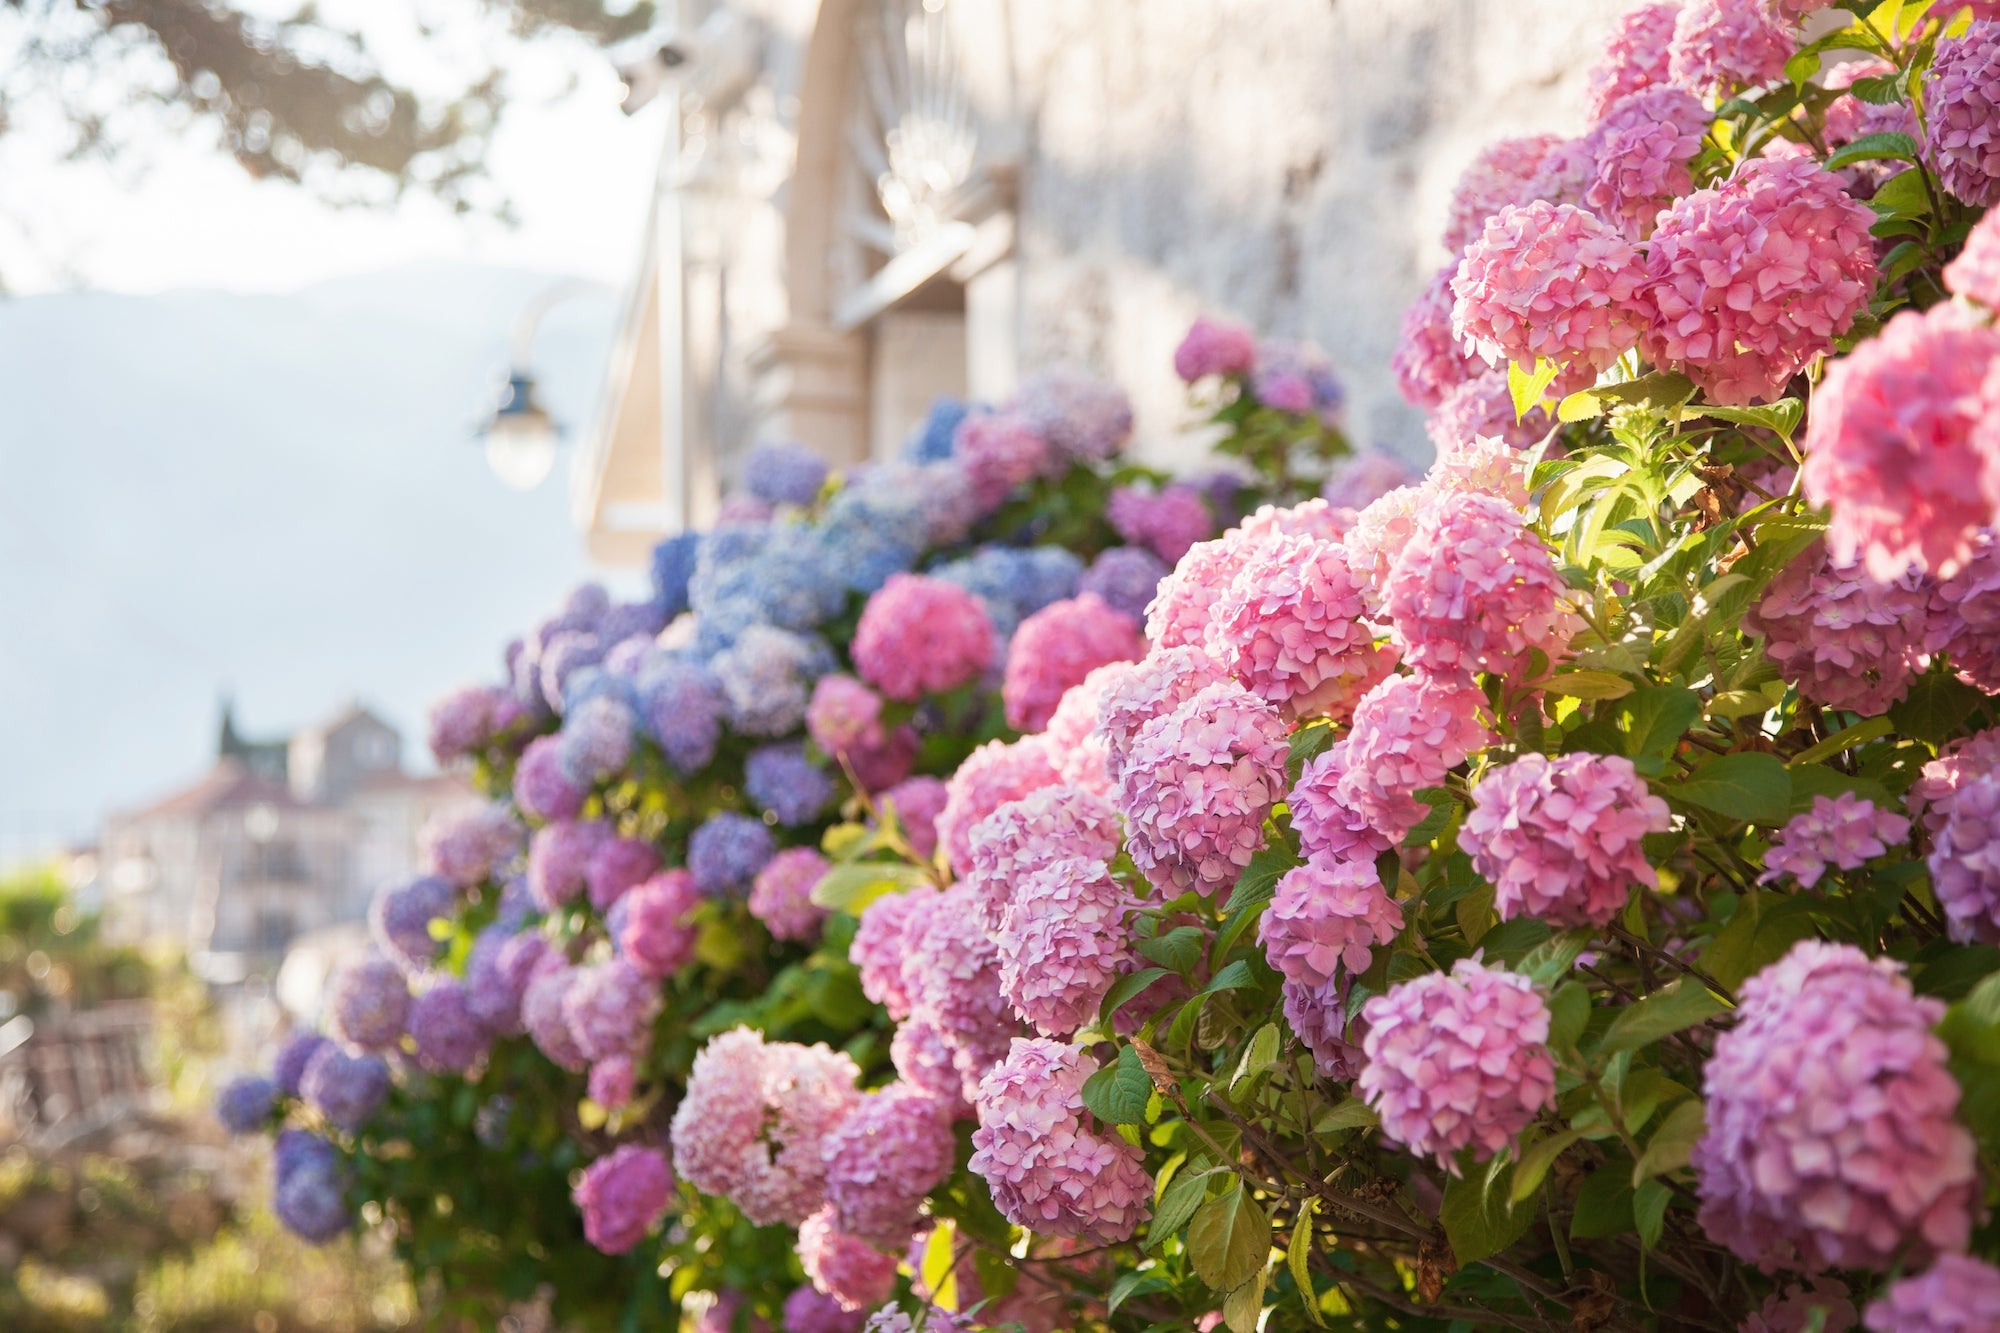 How To Change the Color of Your Hydrangeas